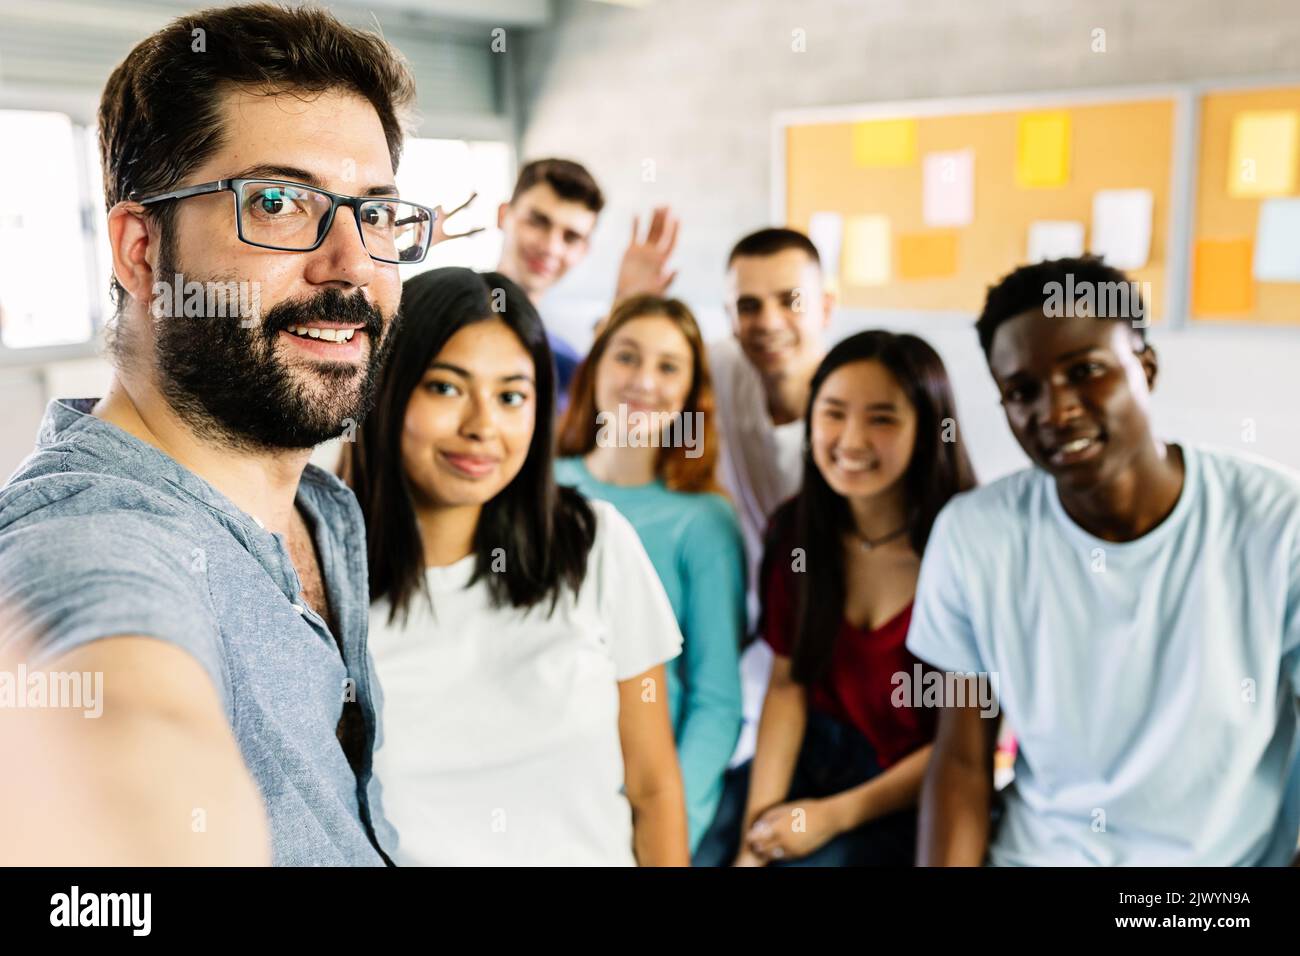 Happy group of young high school students taking selfie portrait with teacher Stock Photo